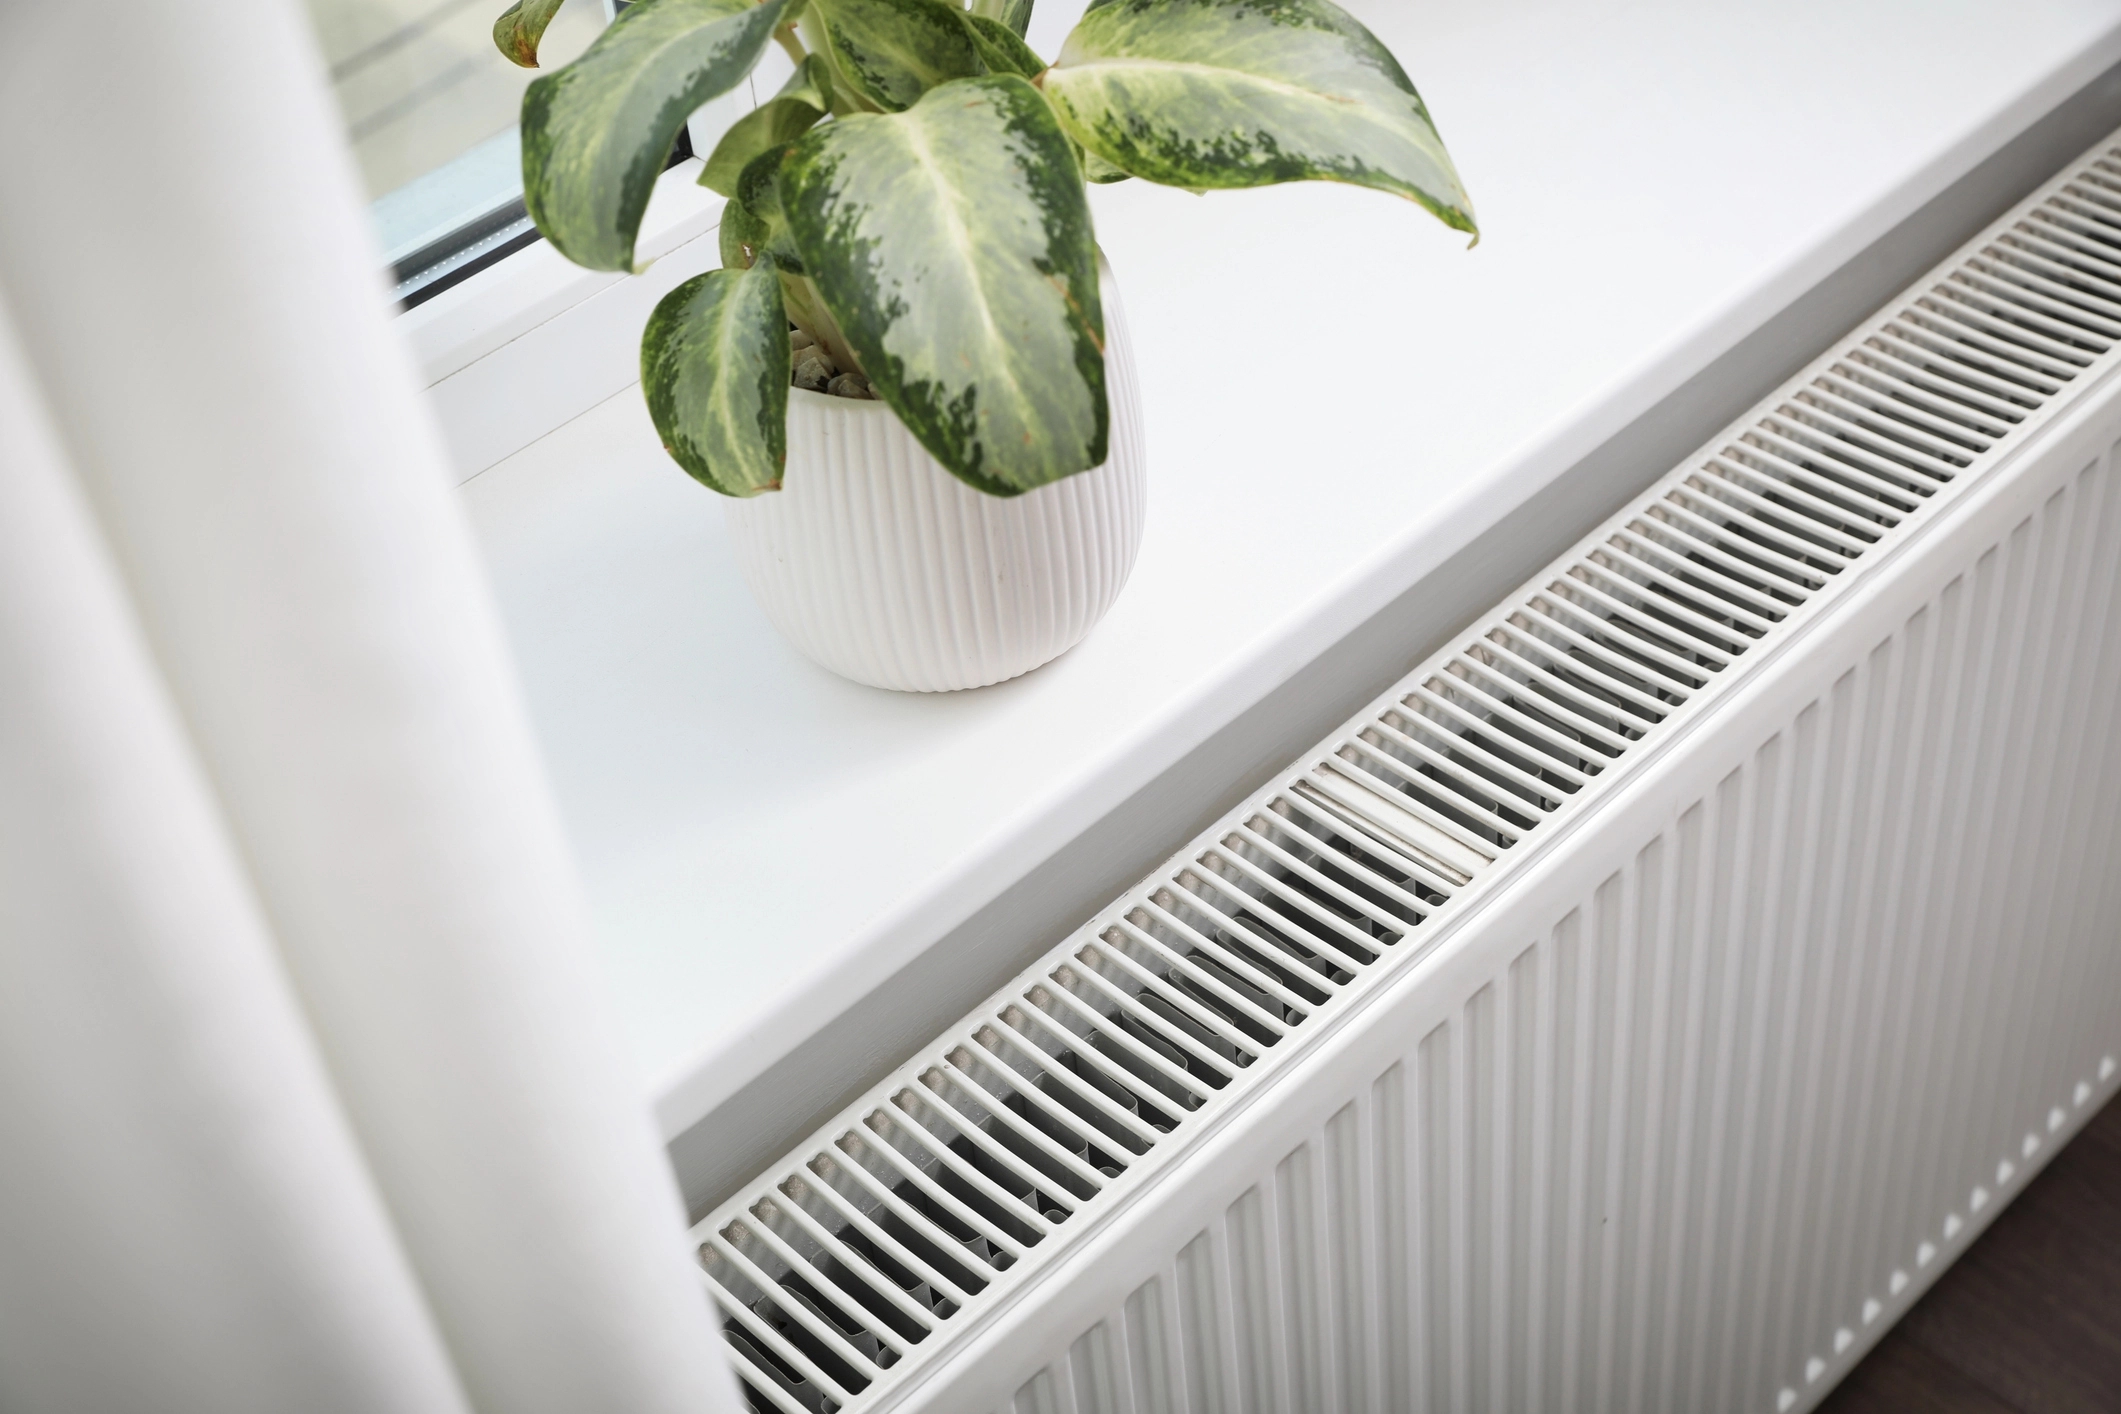 Fan assisted radiator installed in a home